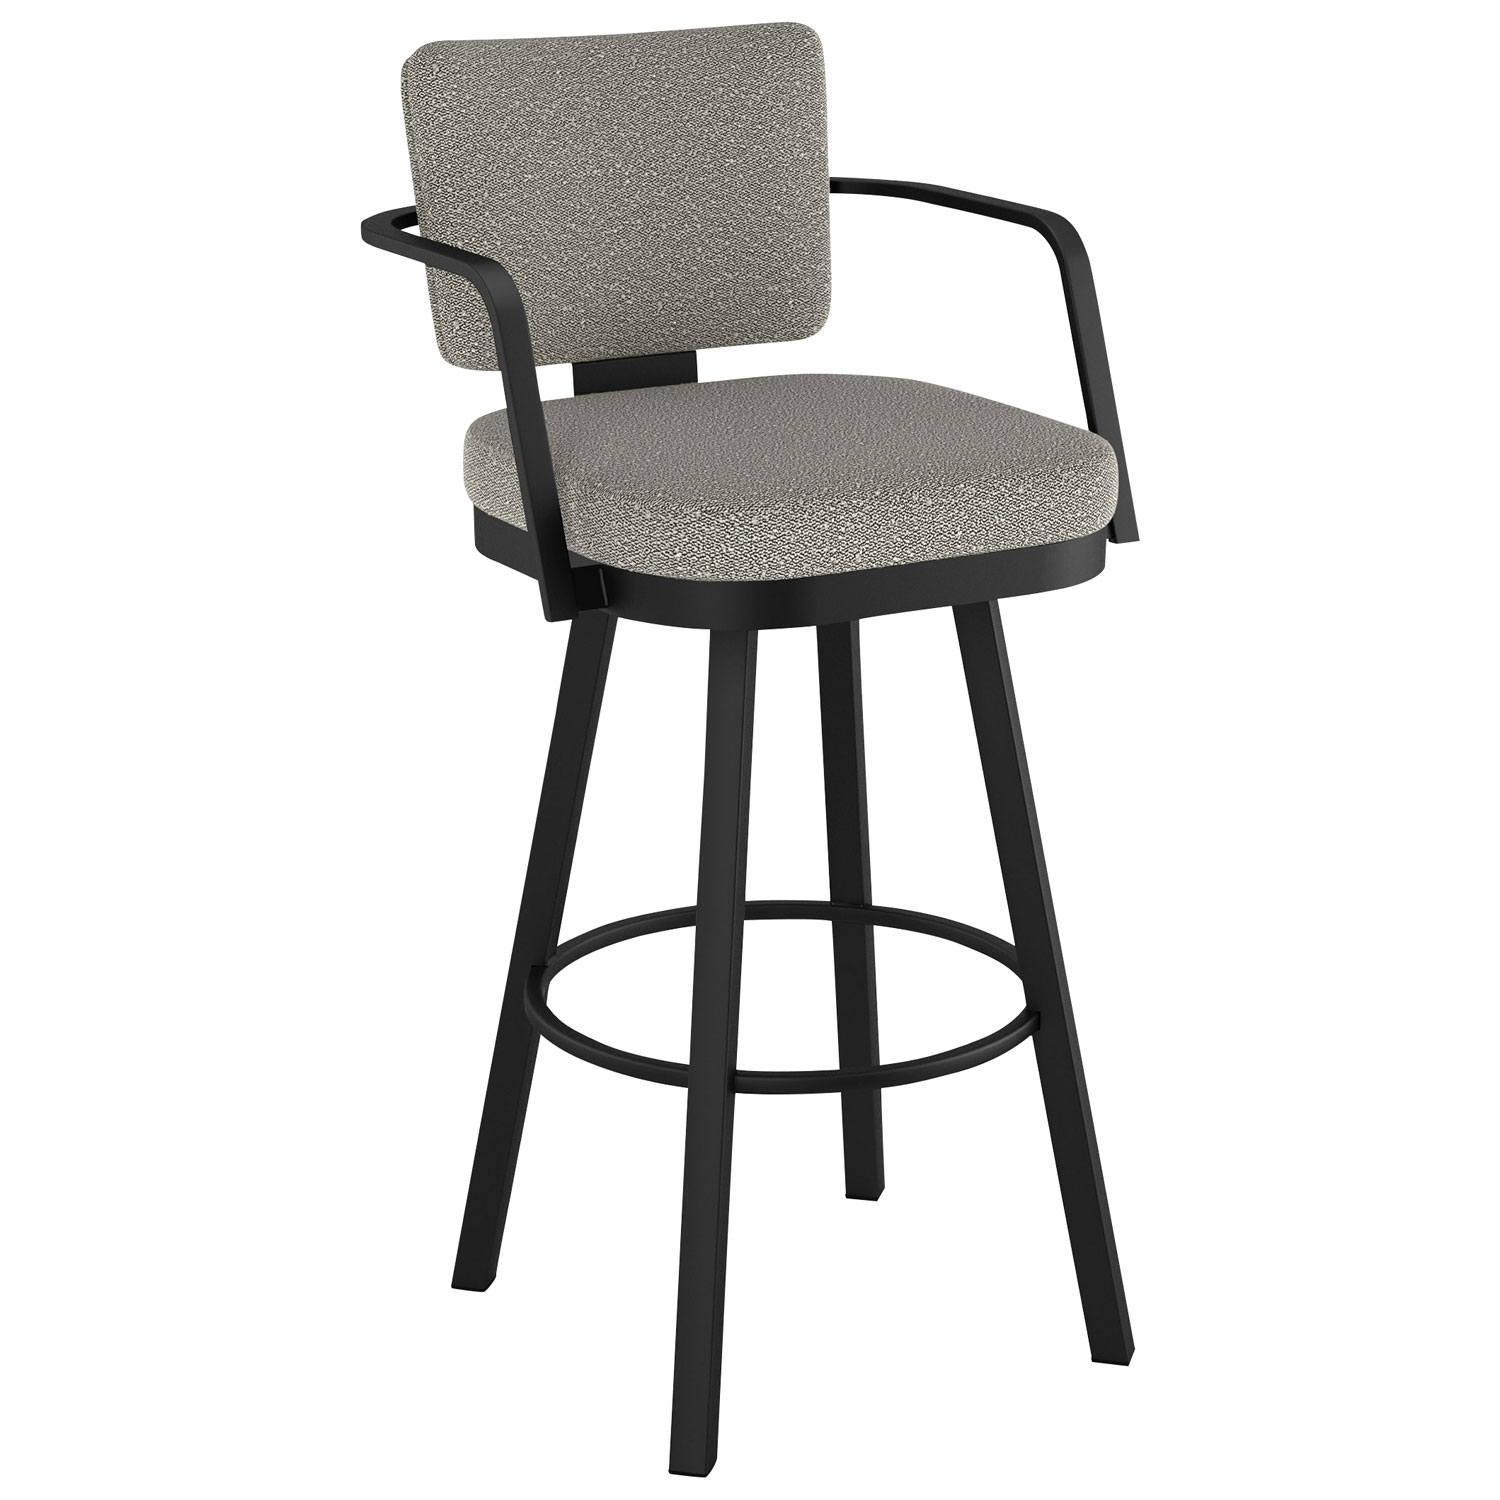 Thea Rustic Country Bar Height Barstool - Beige Grey Boucle/Black